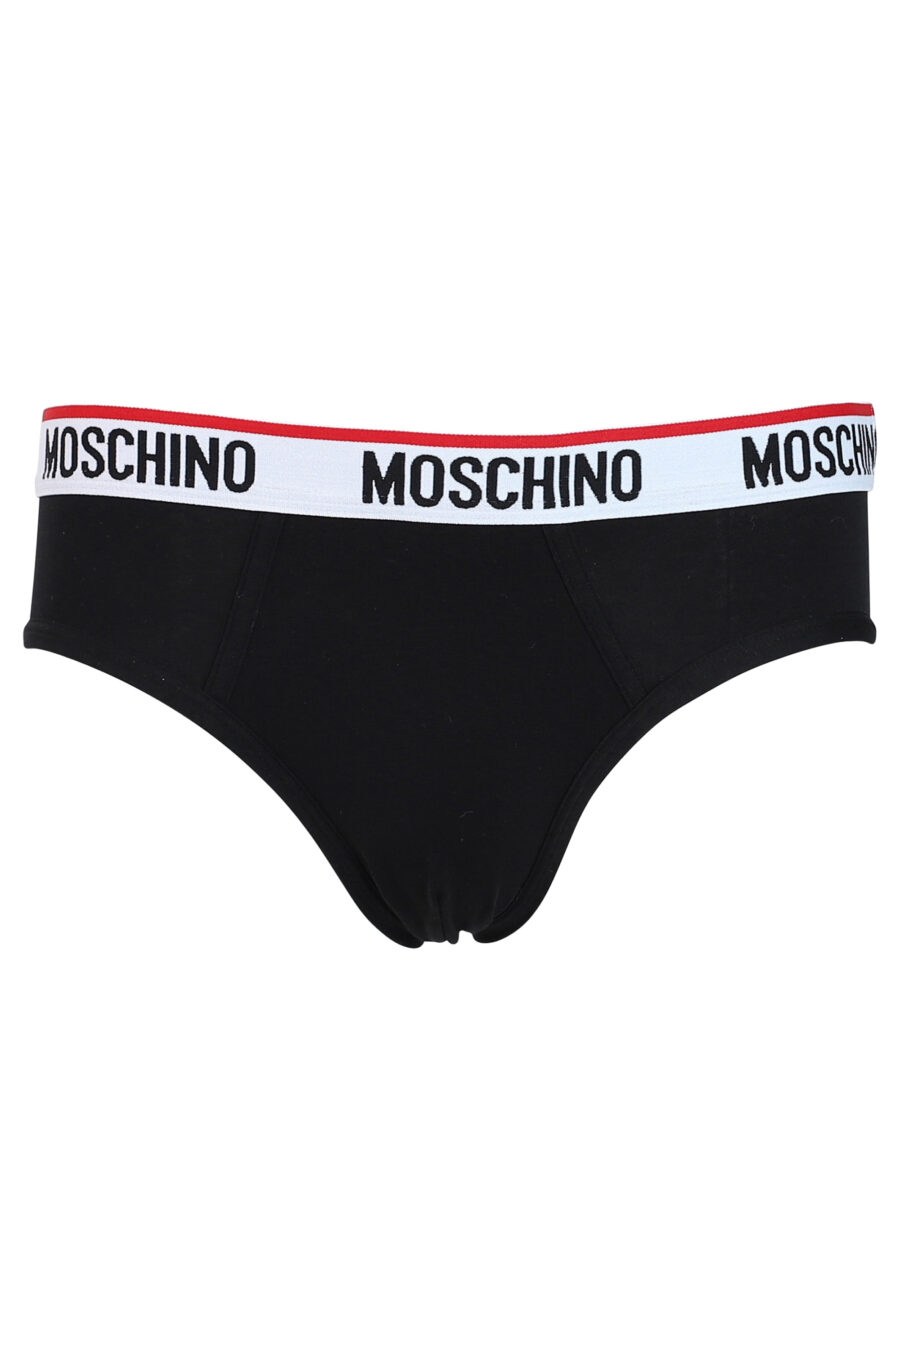 Pack of two boxer shorts with black and red logo on waistband - IMG 0345